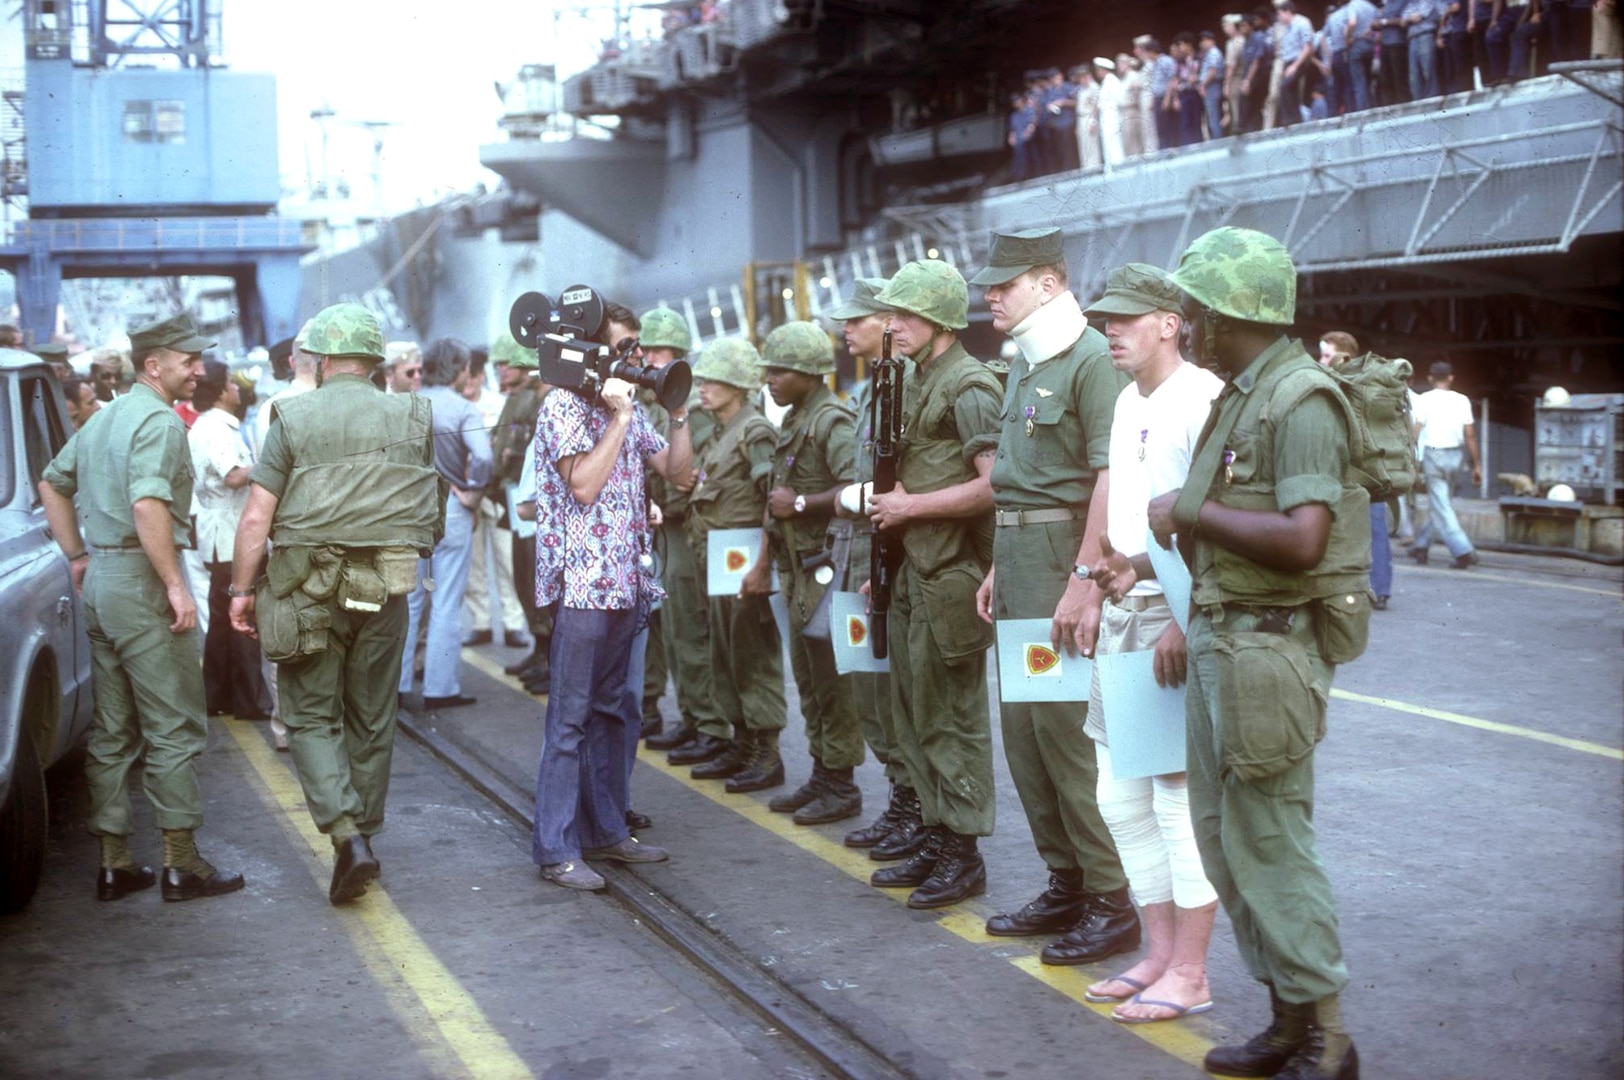 Marines from Company G and Company E, 2nd Battalion, 9th Marines, being interviewed pier side following rescue operation of merchant vessel SS Mayaguez, May 20, 1975 (Gerald R. Ford Presidential Library)